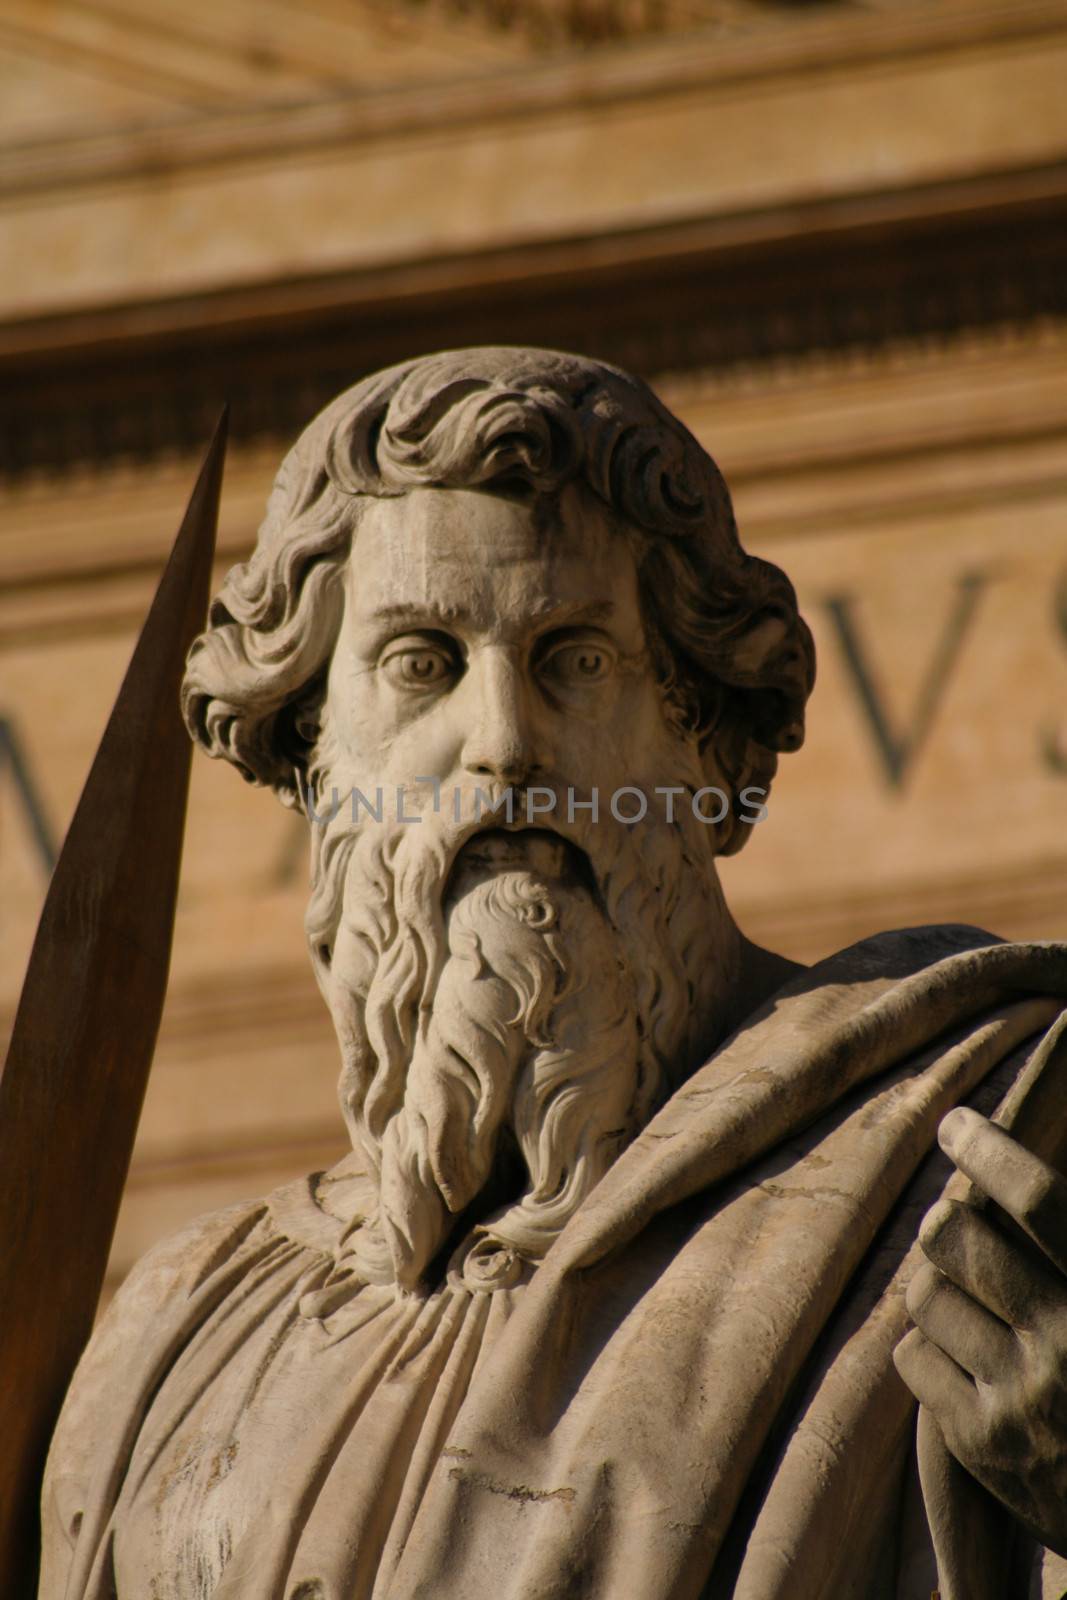 Detail of a statue in the Saint Peter Plaza in Rome, Italy.